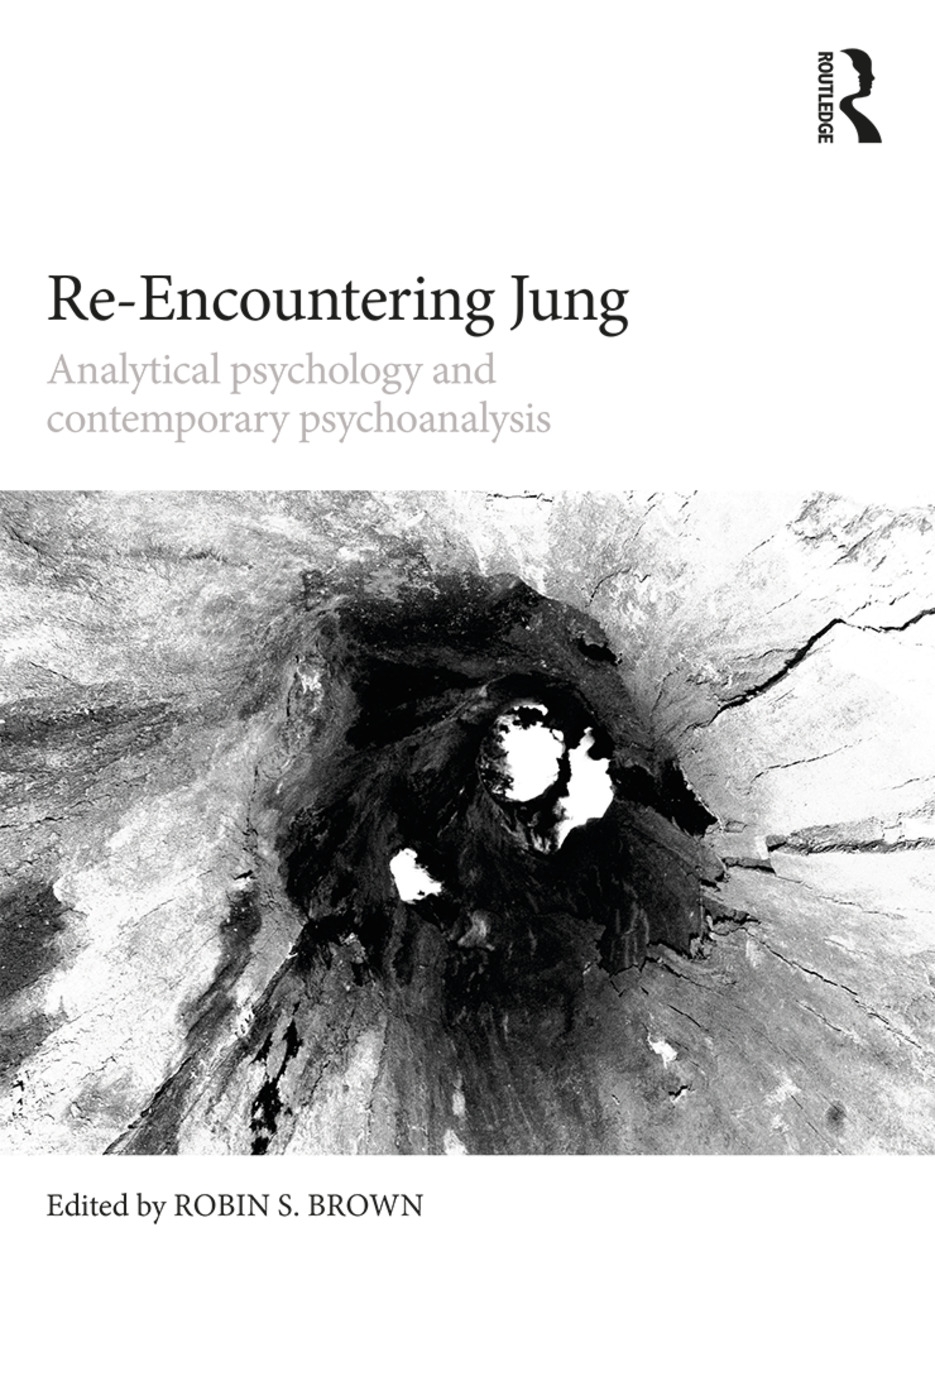 Re-Encountering Jung: Analytical Psychology and Contemporary Psychoanalysis